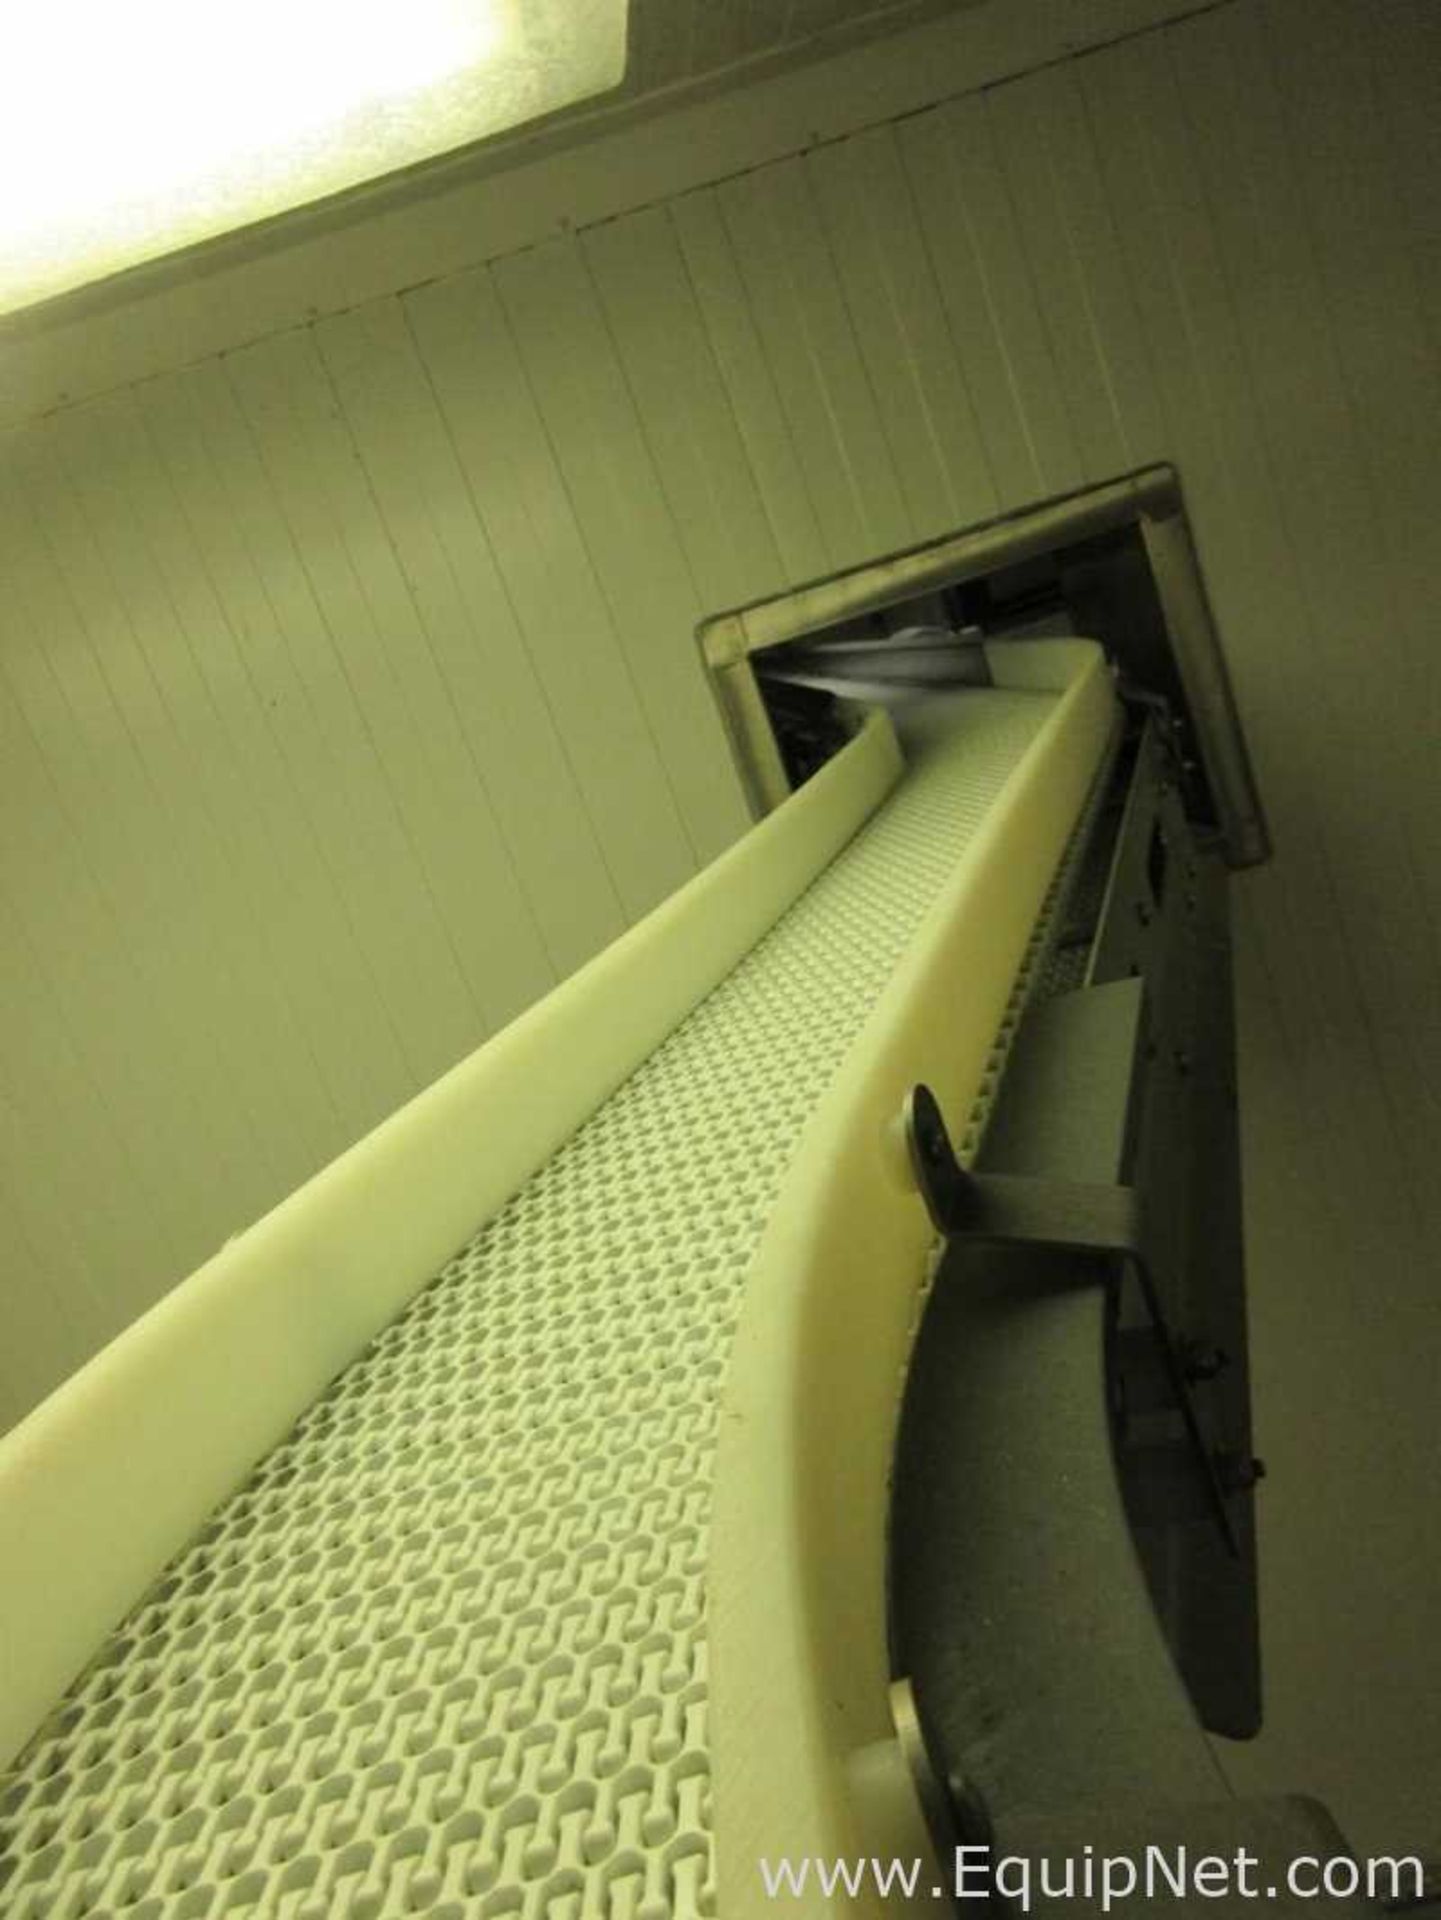 Coastline Approx.300 Foot Belt Conveyor in Stainless Steel With 10 Level Spiral Conveyor For Cartons - Image 5 of 21